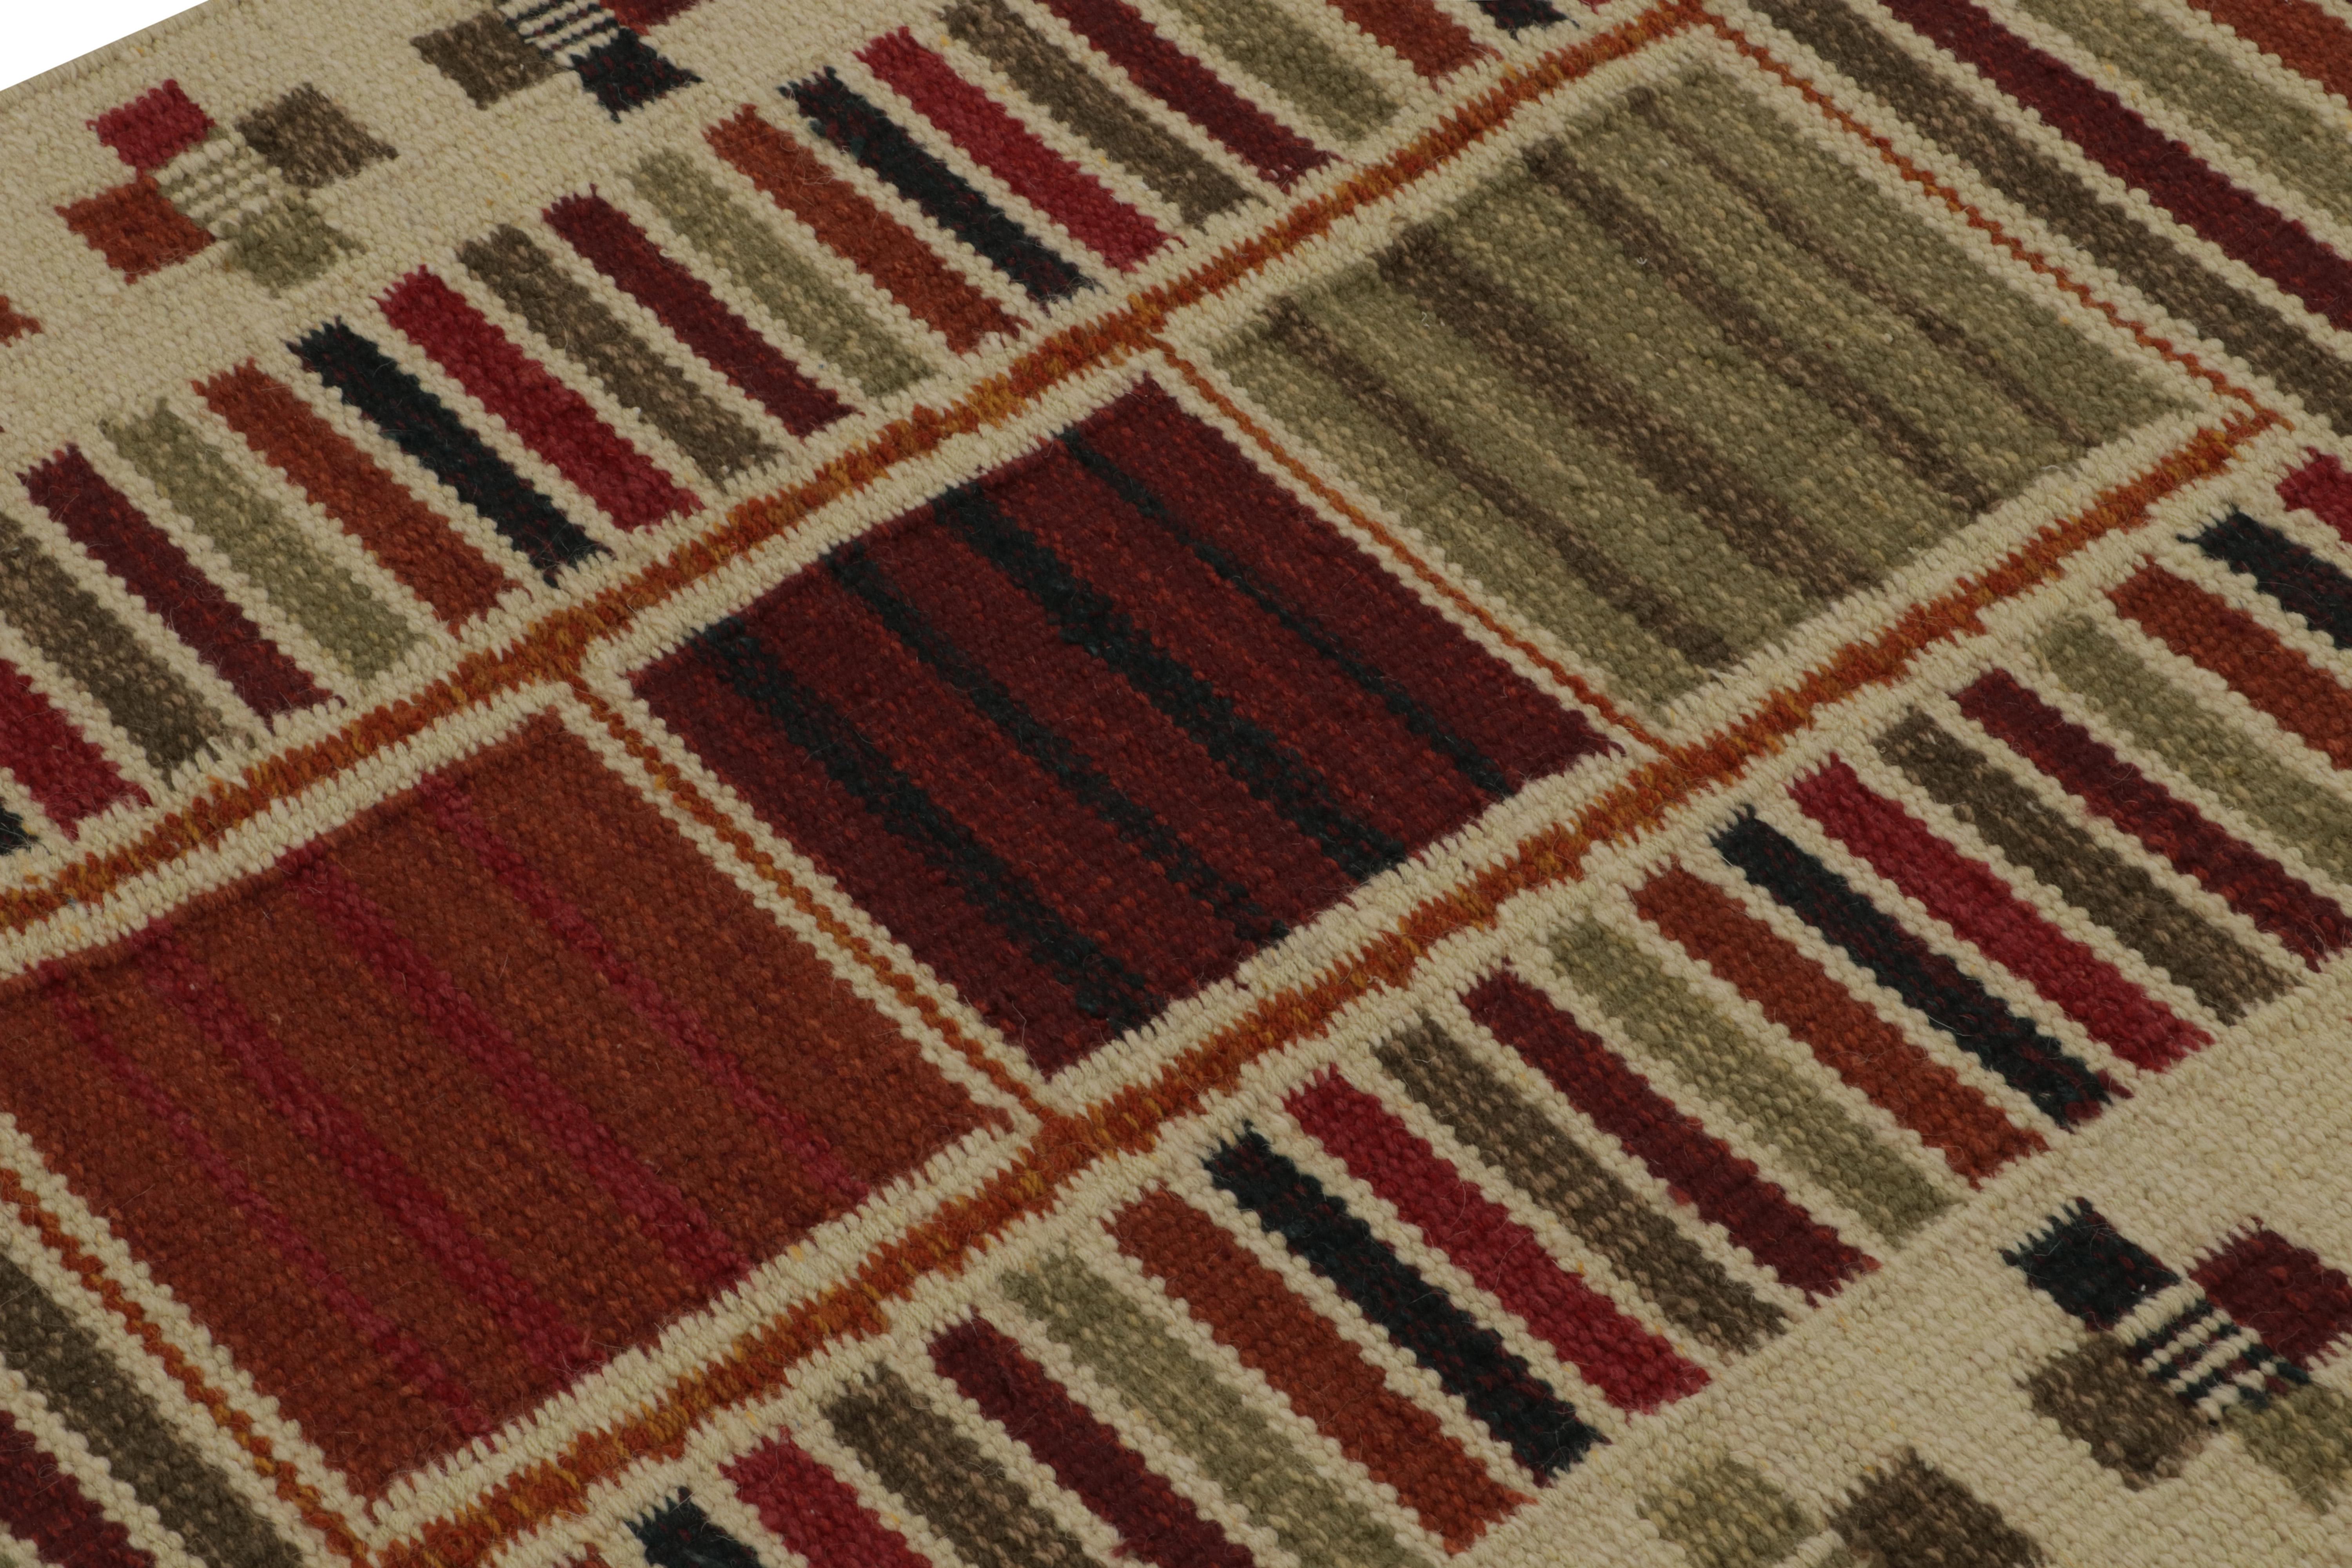 Indian Rug & Kilim’s Scandinavian Style Kilim Rug in Polychromatic Patterns For Sale